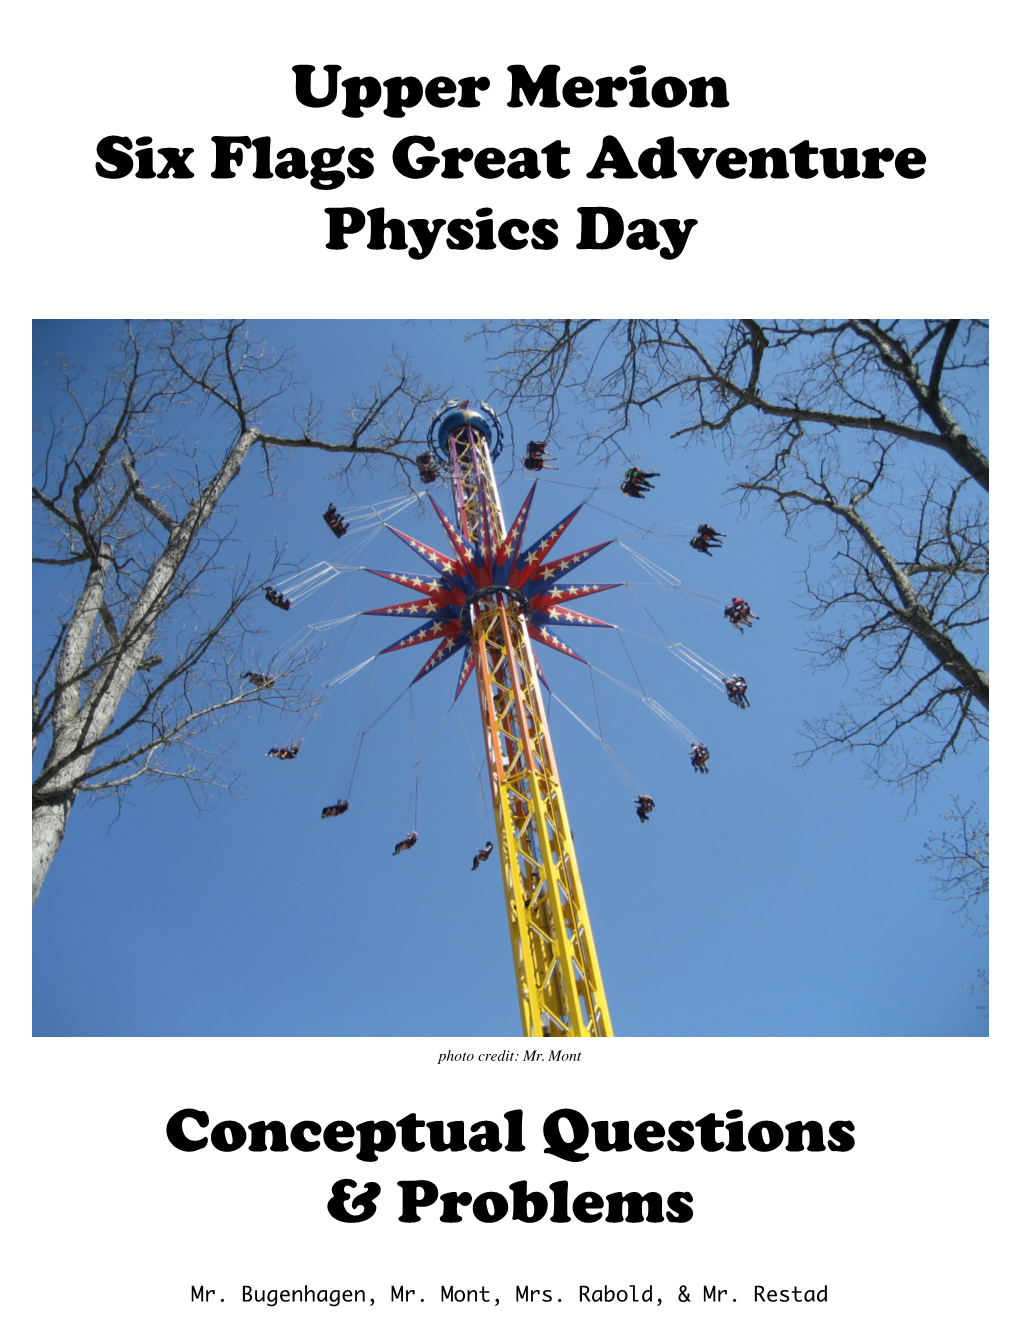 Upper Merion Six Flags Great Adventure Physics Day Conceptual